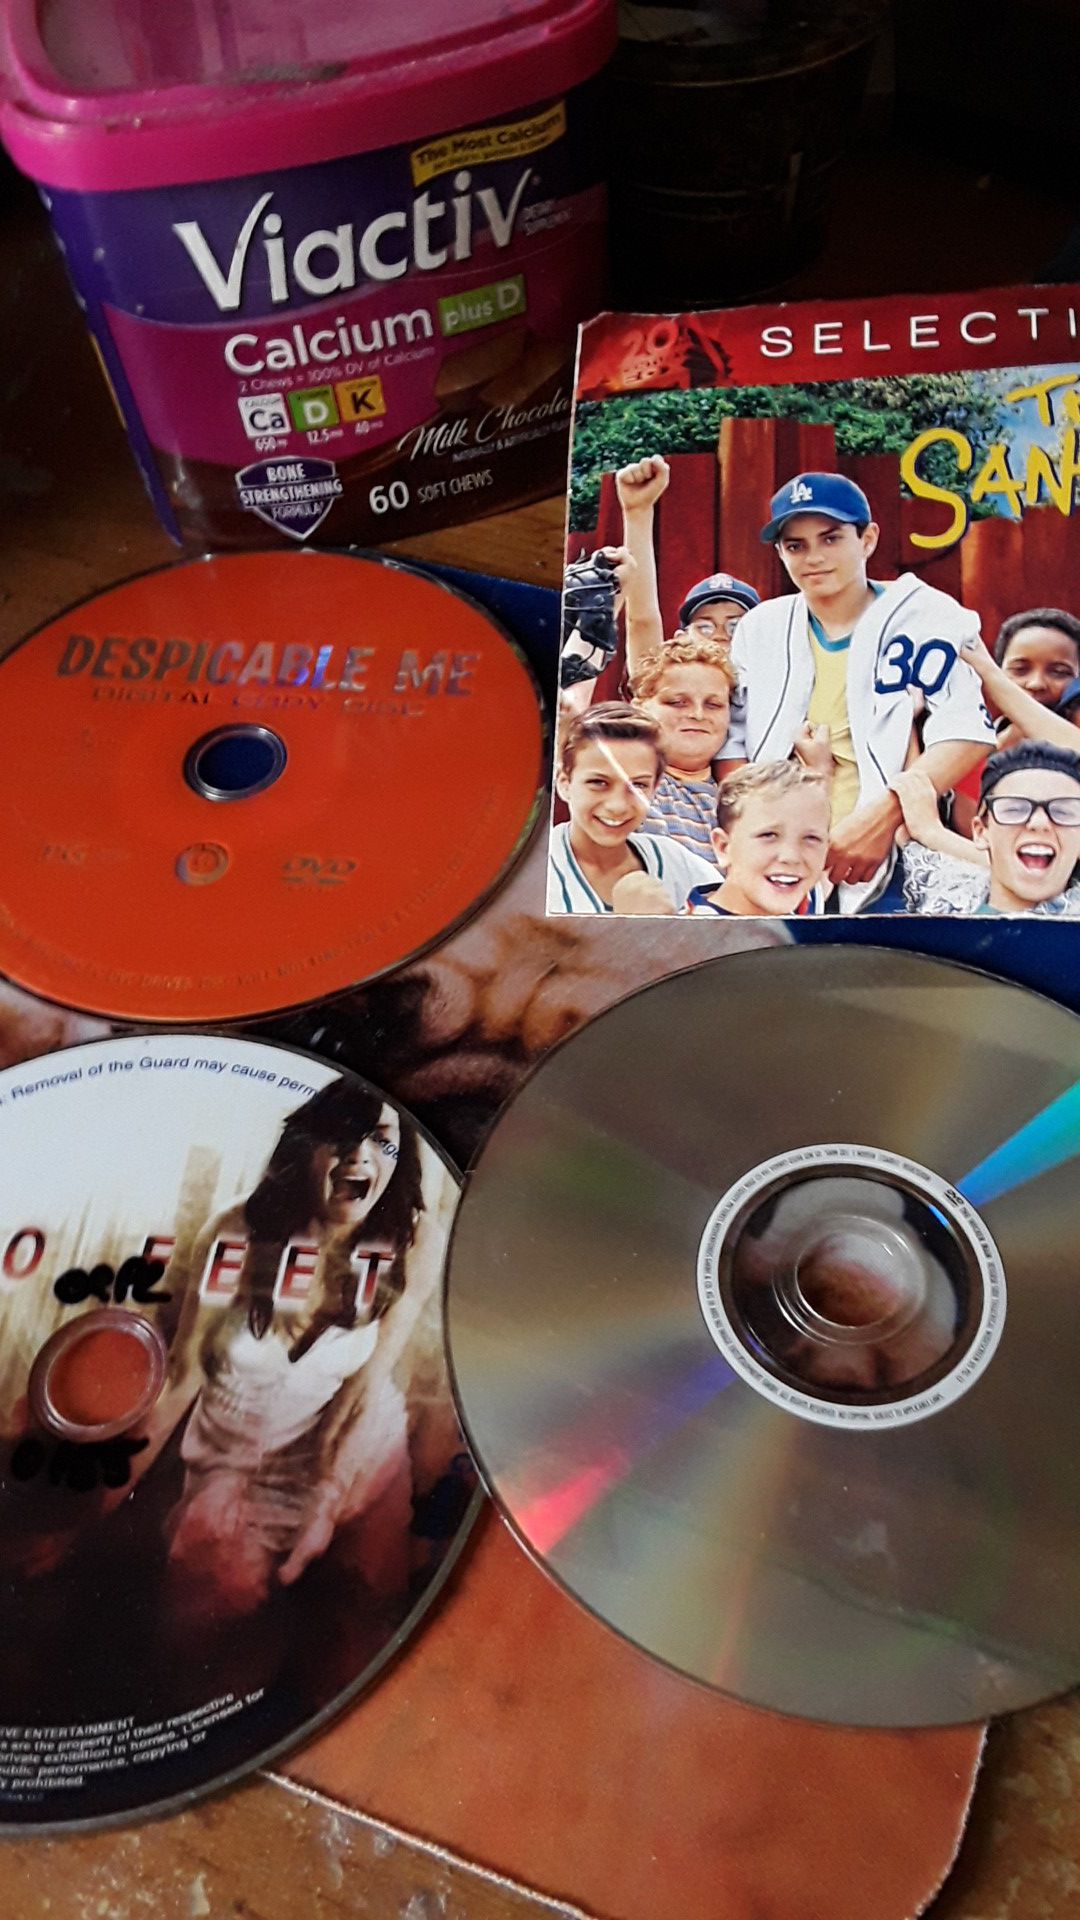 4 DVDS IN VINTON IA THE SANDLOT IS NEVER BEEN OPENED OR PLAYED